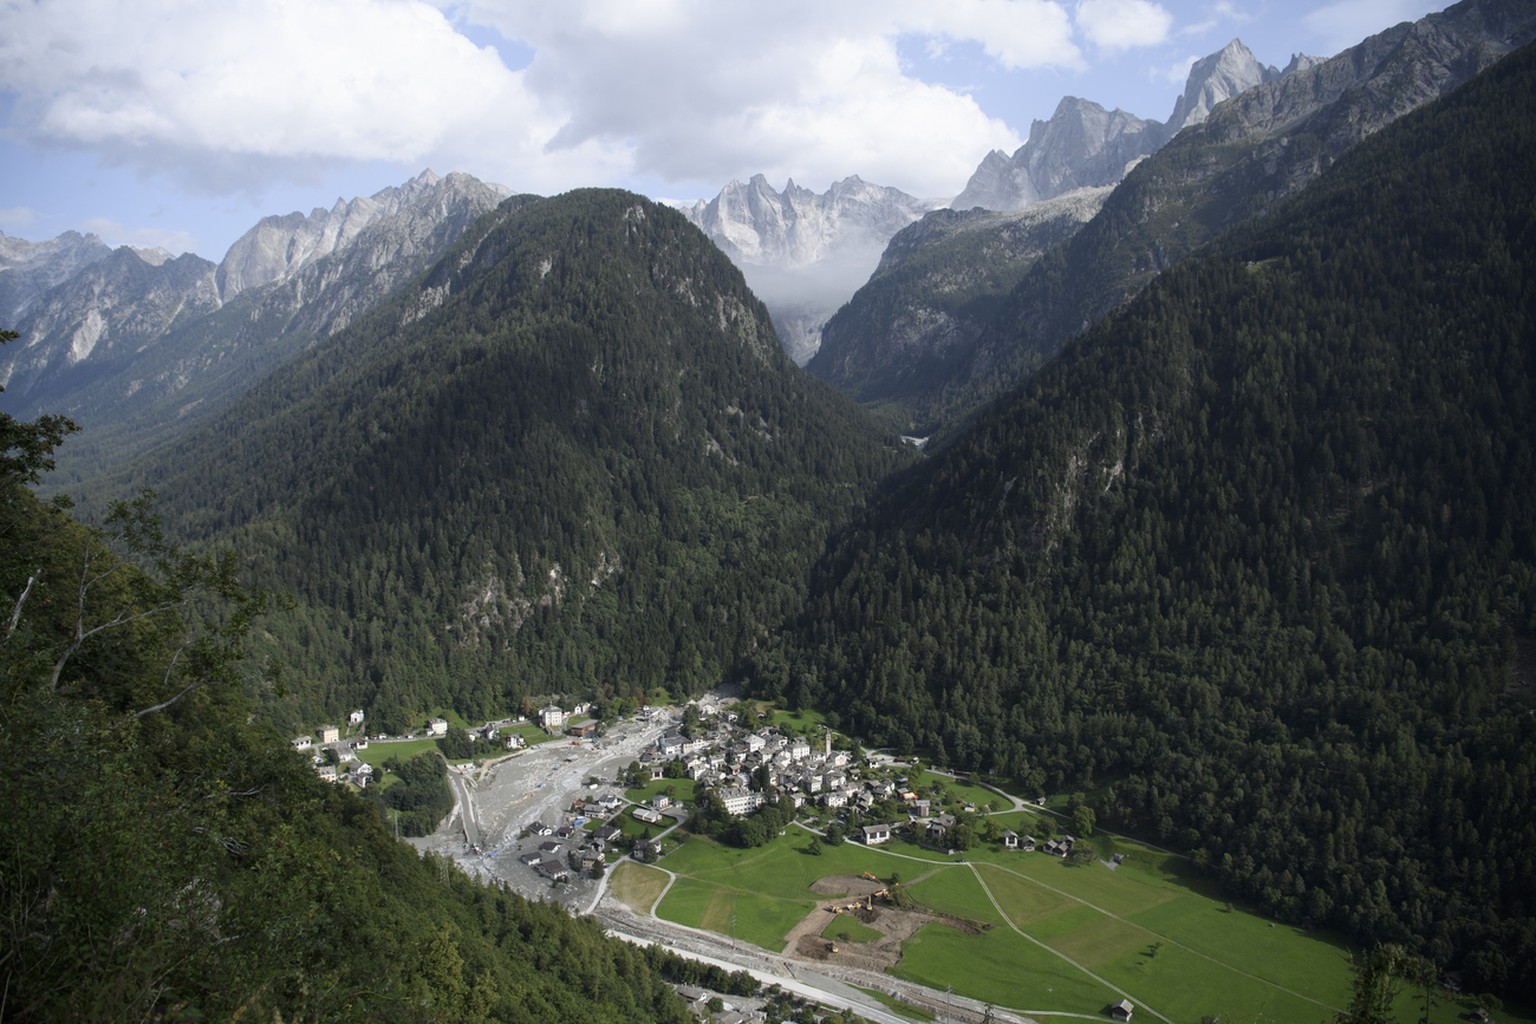 Search and rescue teams arrive, in the village Bondo in Graubuenden in South Switzerland, on Thursday, August 24, 2017. The village had been hit by a massive landslide yesterday. The main road between ...